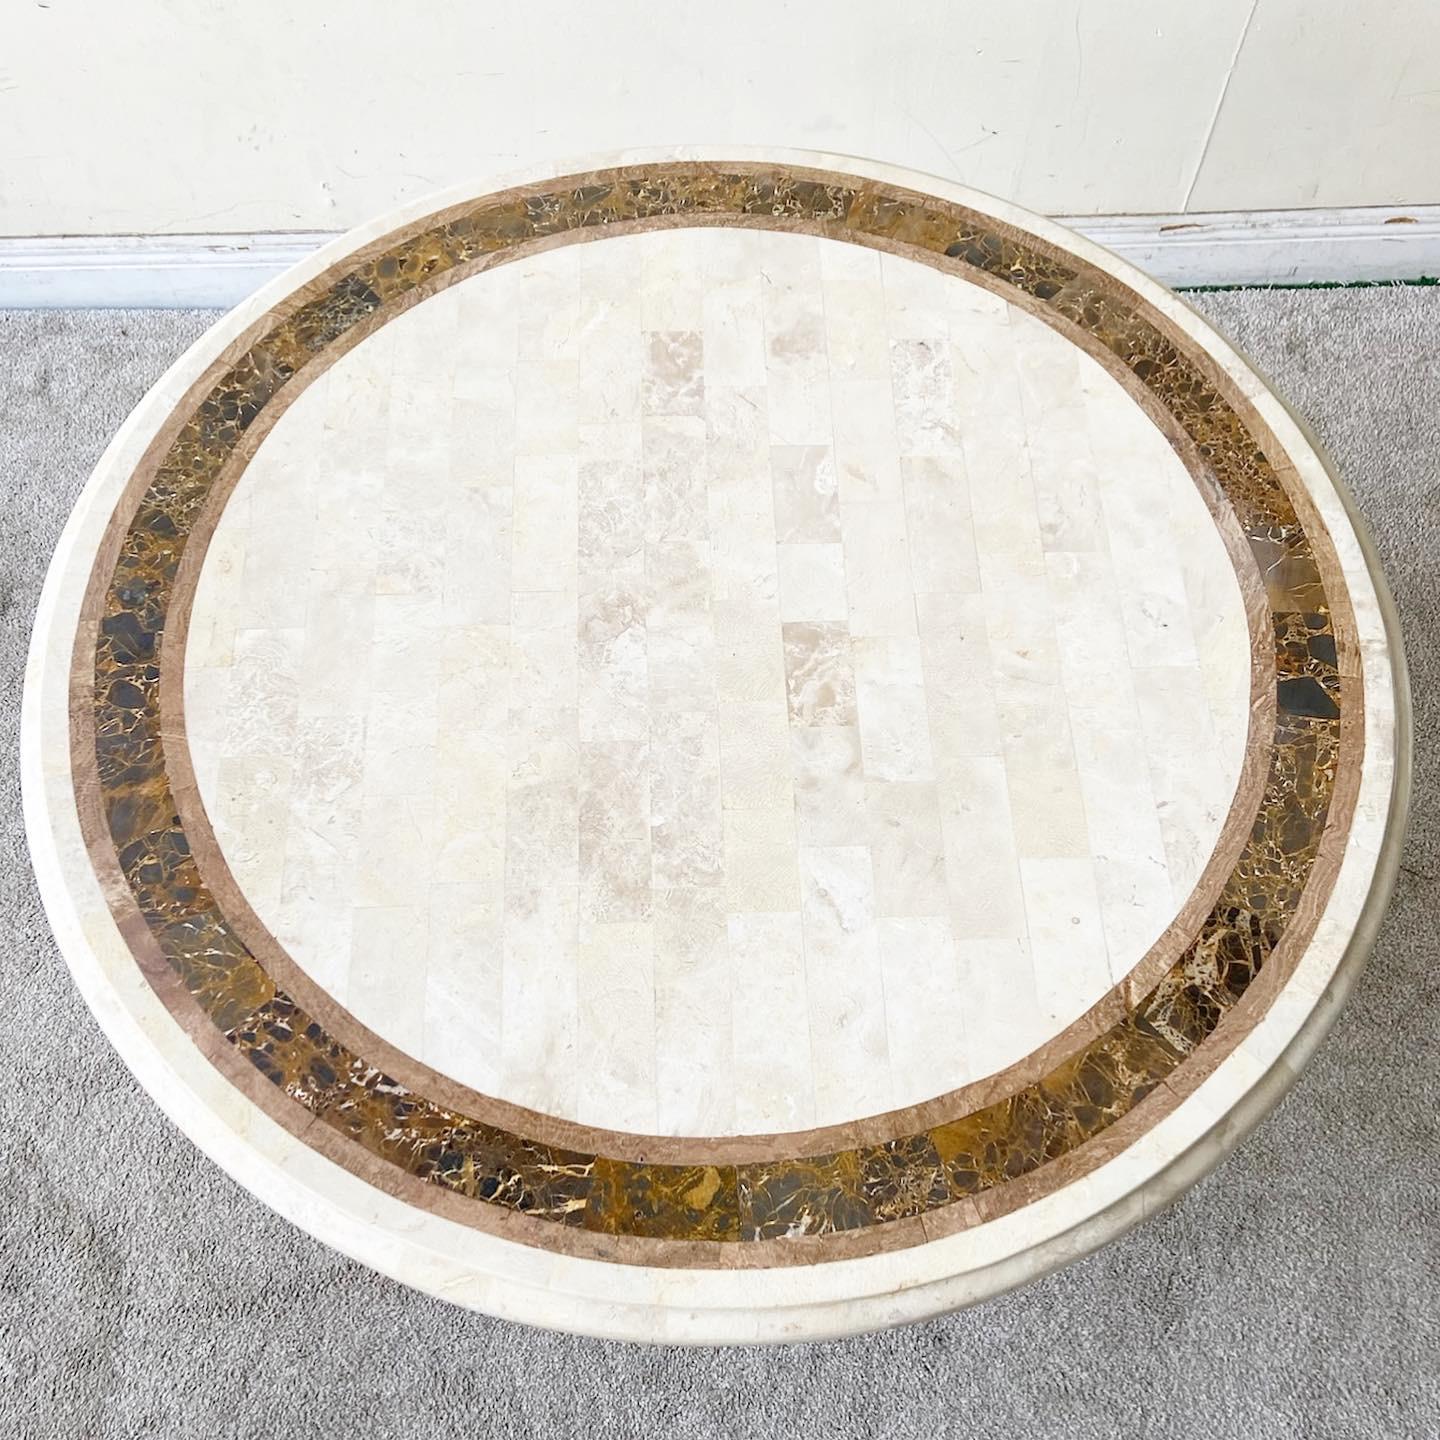 Exceptional vintage boho chic circular dining table. Features a tessellated polished stone top which rests on top on a bamboo rattan pedestal base.